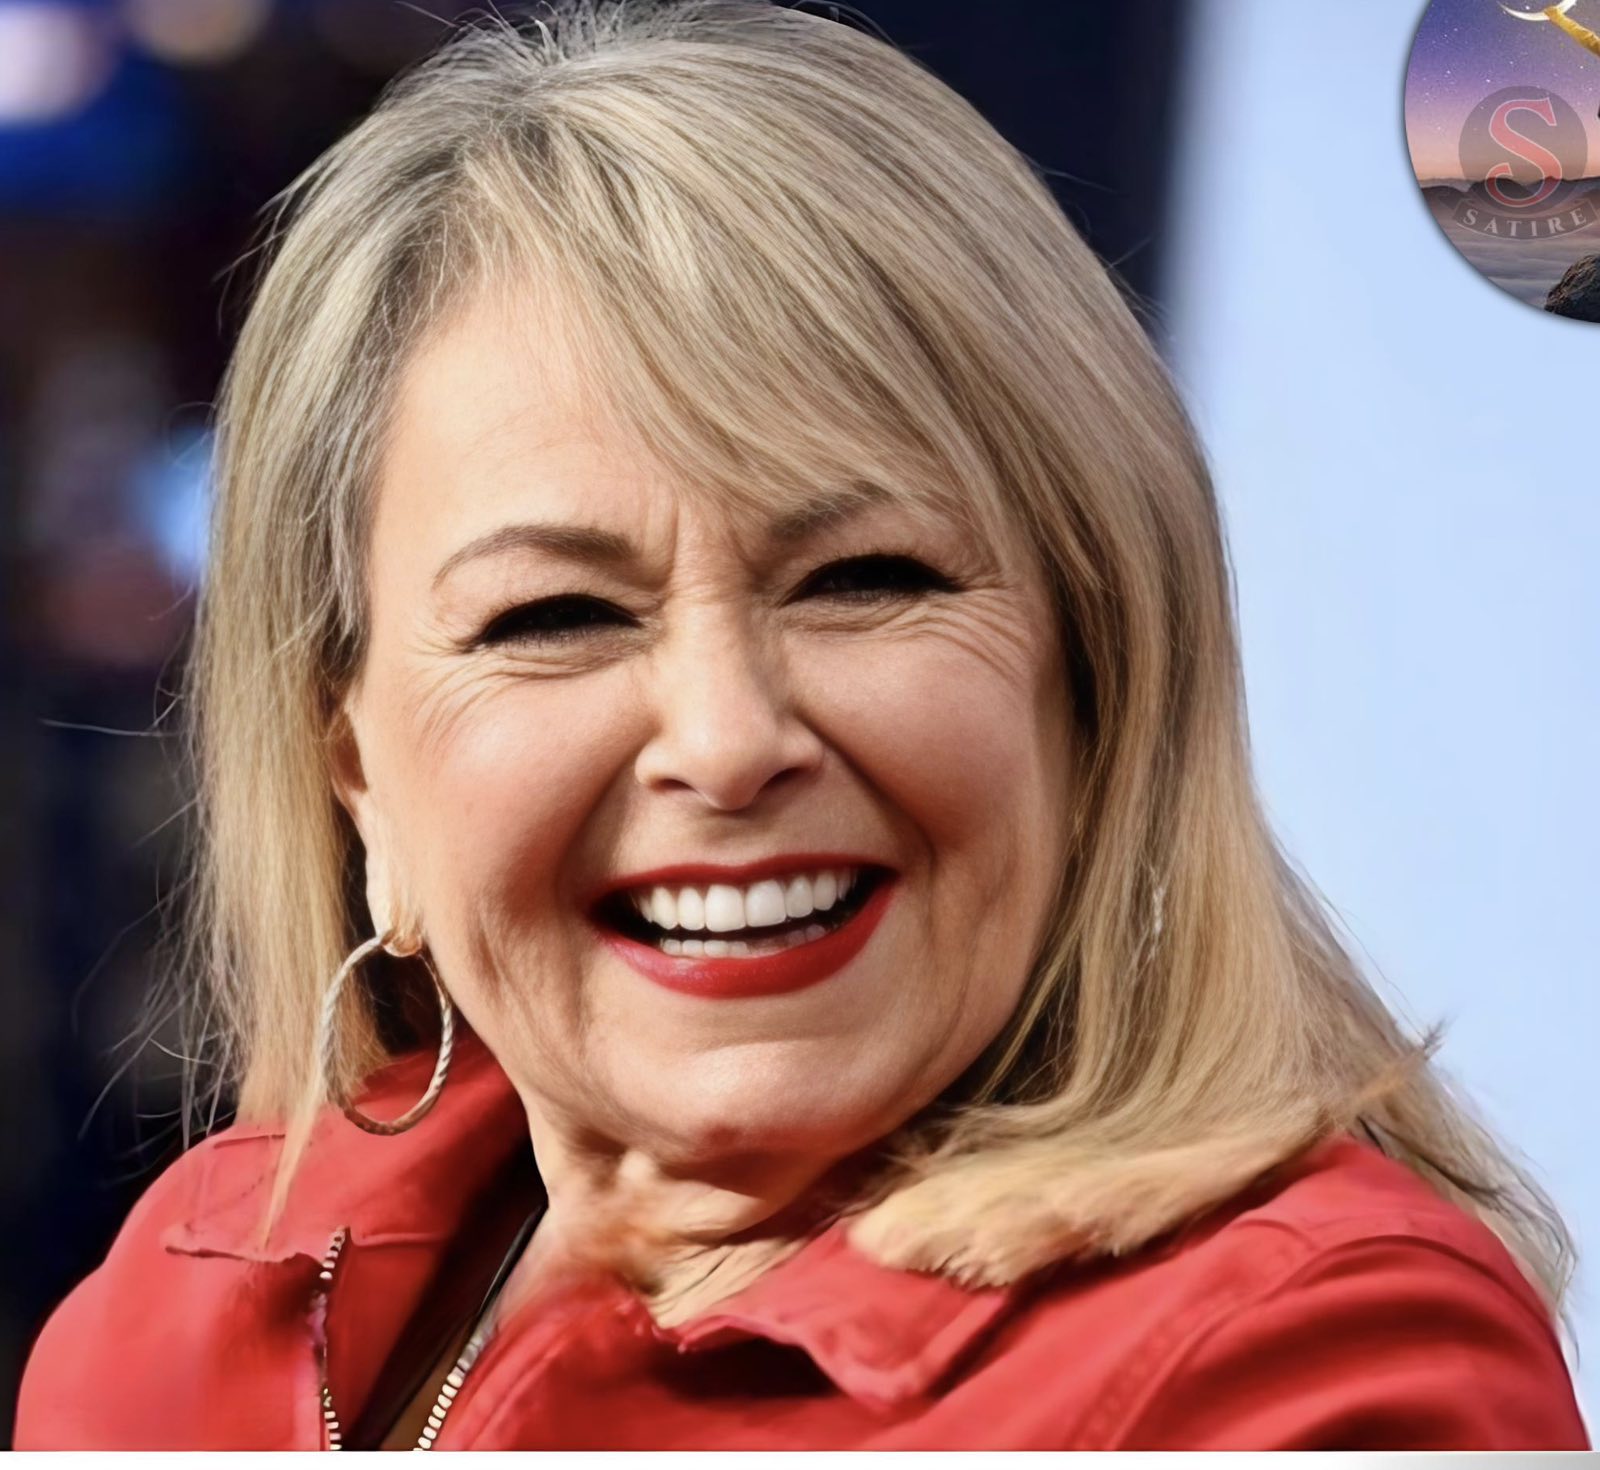 Fox Entertainment Secures Roseanne Barr for a Morning Show to Rival ABC’s “The View”